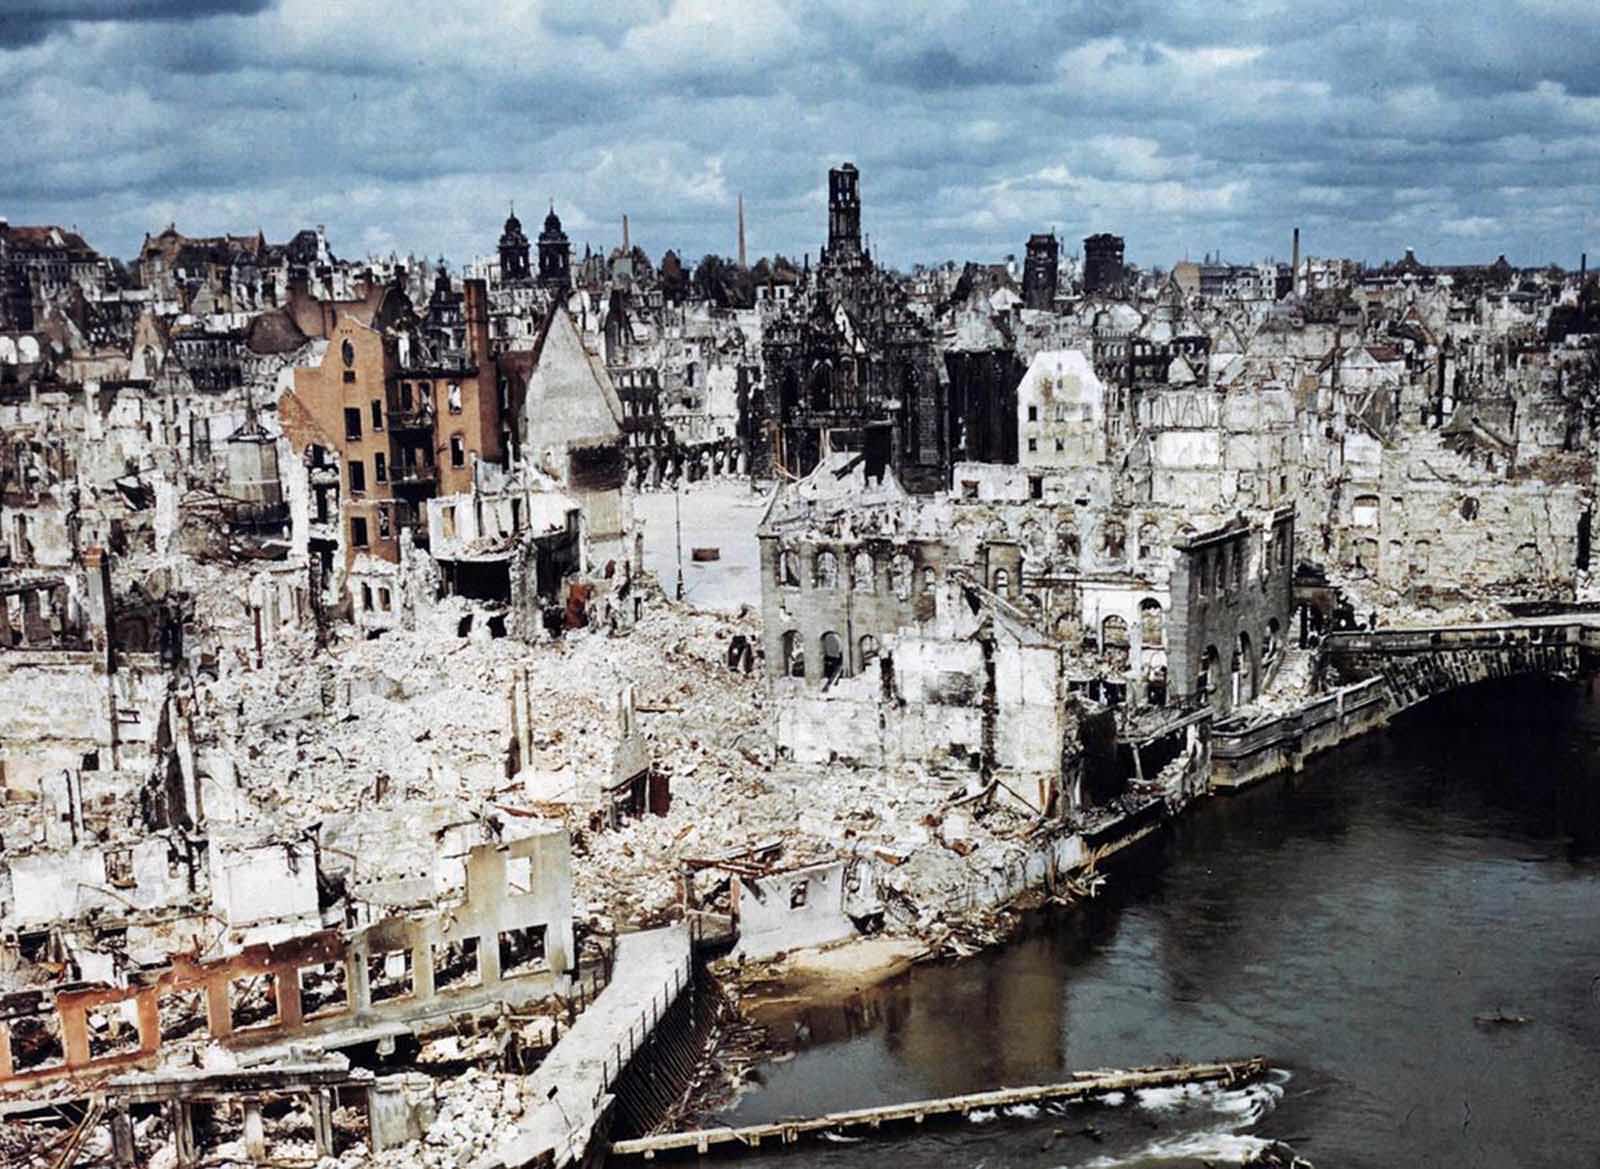 A color photograph of the bombed-out historic city of Nuremberg, Germany in June of 1945, after the end of World War II. Nuremberg had been the host of huge Nazi Party conventions from 1927 to 1938. The last scheduled rally in 1939 was canceled at the last minute due to a scheduling conflict: the German invasion of Poland one day prior to the rally date. The city was also the birthplace of the Nuremberg Laws, a set of draconian antisemitic laws adopted by Nazi Germany. Allied bombings from 1943 until 1945 destroyed more than 90% of the city center, and killed more than 6,000 residents. Nuremberg would soon become famous one last time as the host of the Nuremberg Trials — a series of military tribunals set up to prosecute the surviving leaders of Nazi Germany. The war crimes these men were charged with included “Crimes Against Humanity”, the systematic murder of more than 10 million people, including some 6 million Jews.